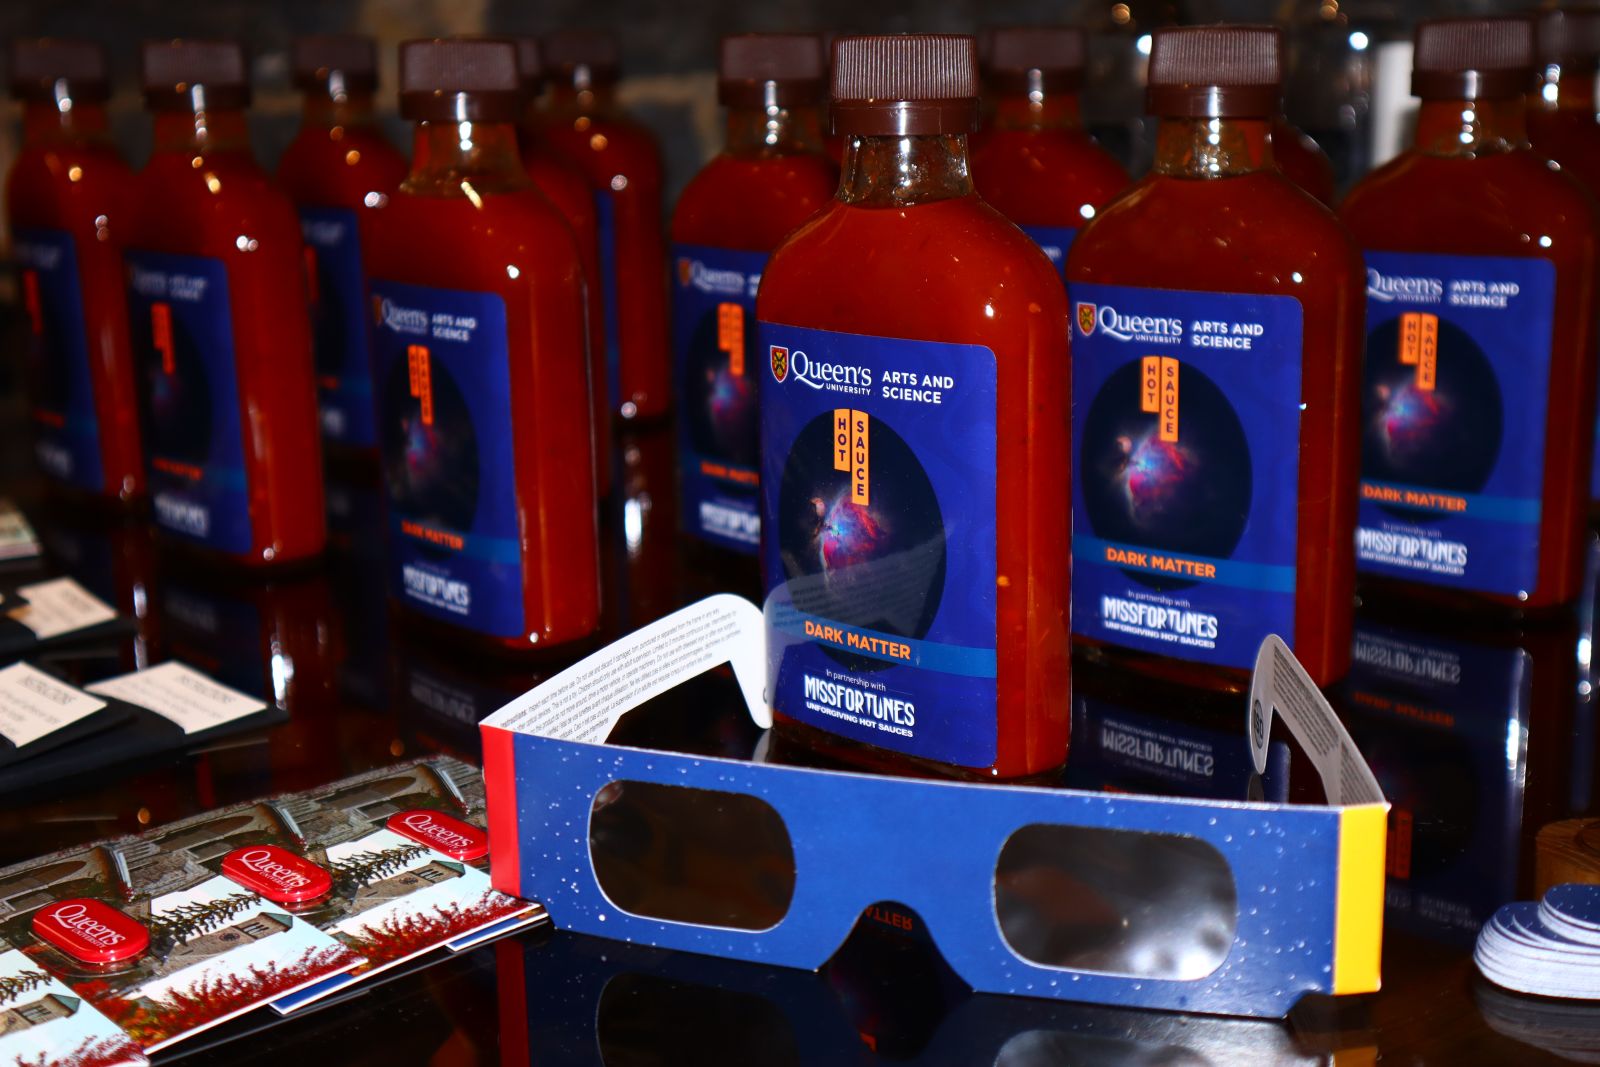 Solar Eclipse Glasses and FAS branded hot sauces titled "Dark Matter"